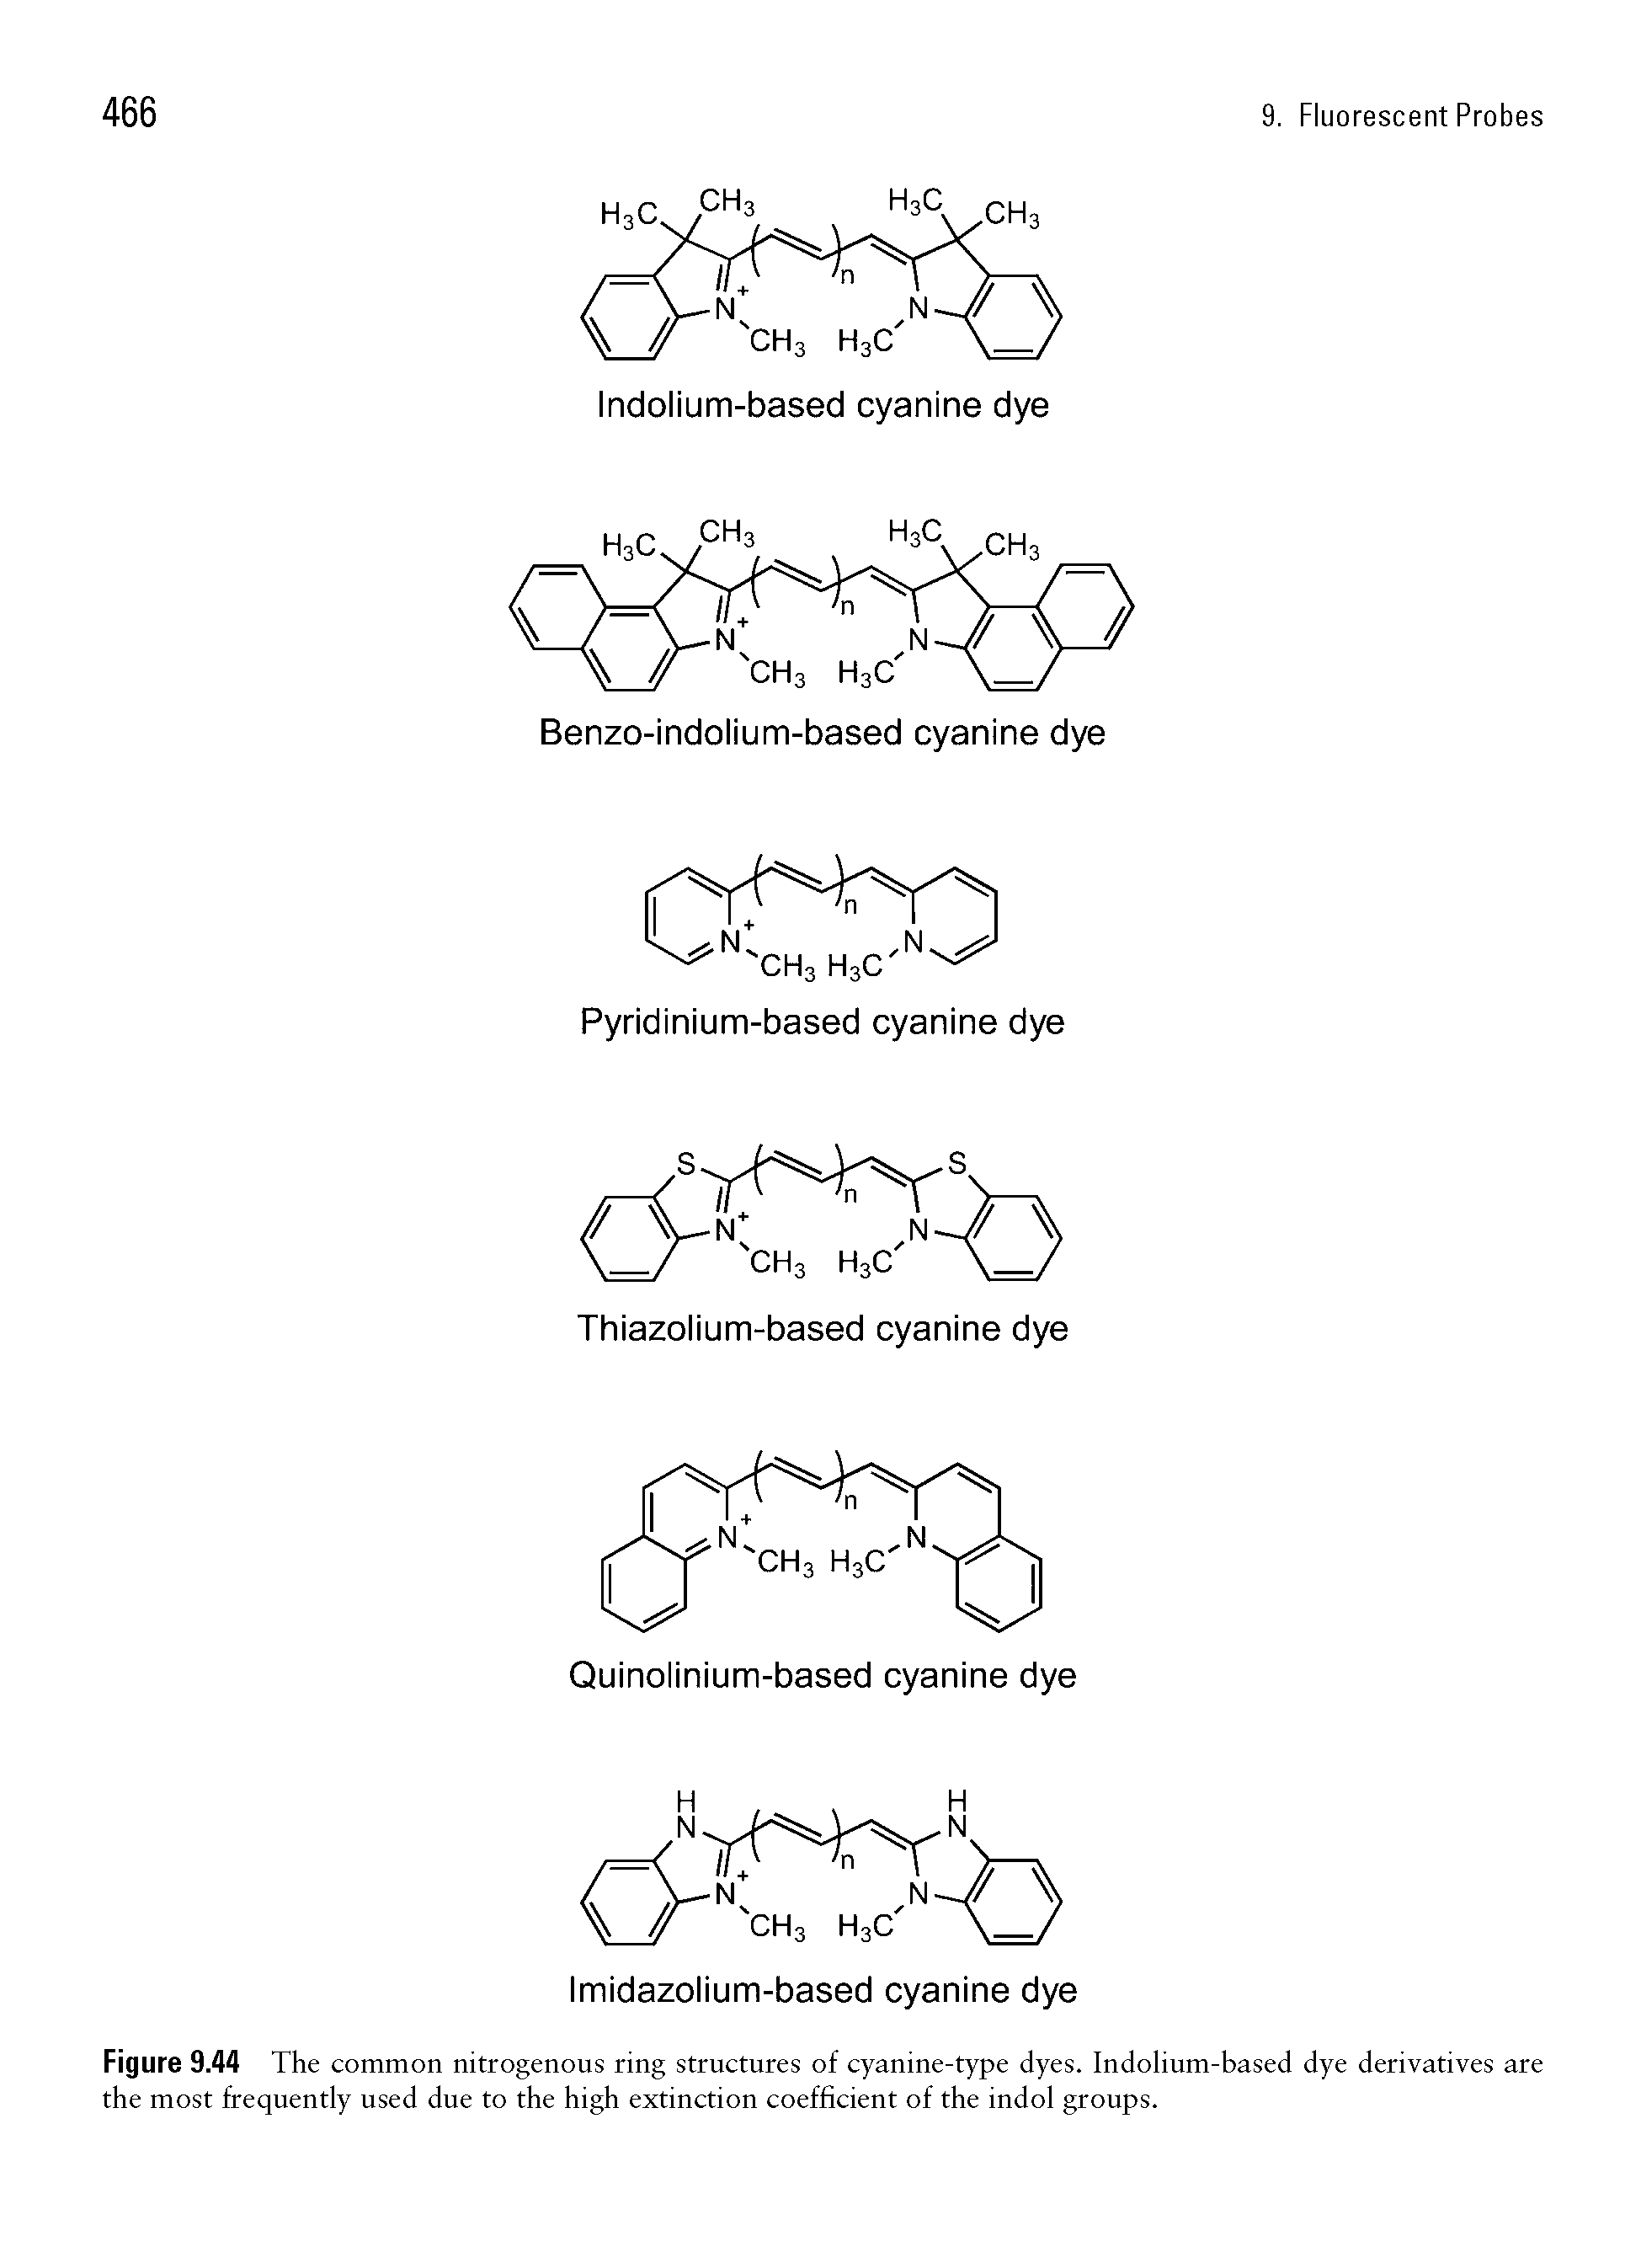 Figure 9.44 The common nitrogenous ring structures of cyanine-type dyes. Indolium-based dye derivatives are the most frequently used due to the high extinction coefficient of the indol groups.